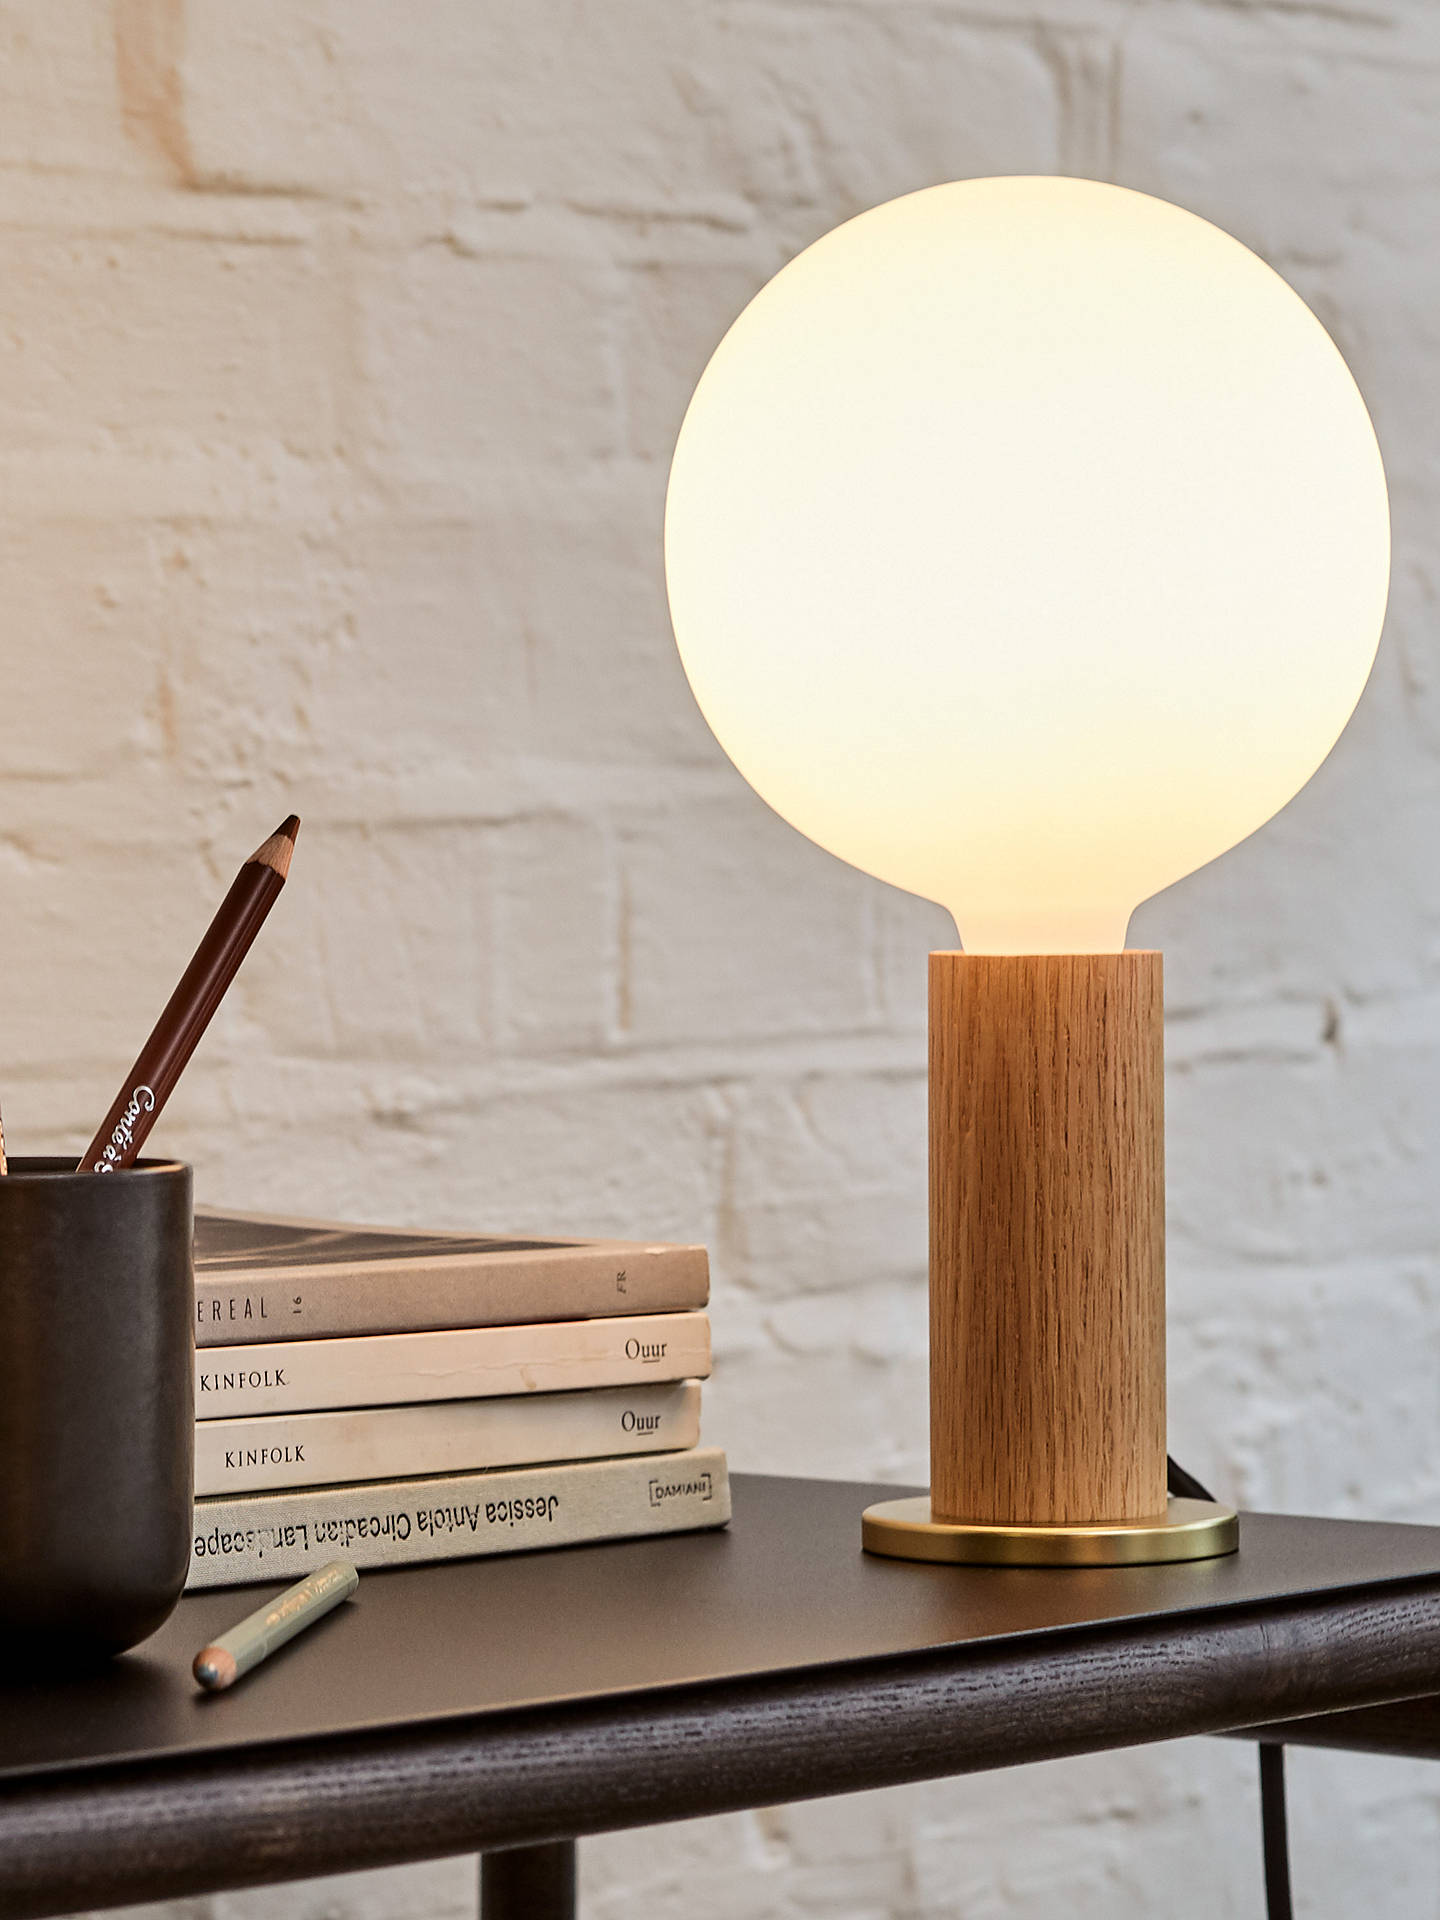 Tala Knuckle Table Lamp with Sphere IV 8W ES LED Dim to Warm Globe Bulb at John Lewis & Partners